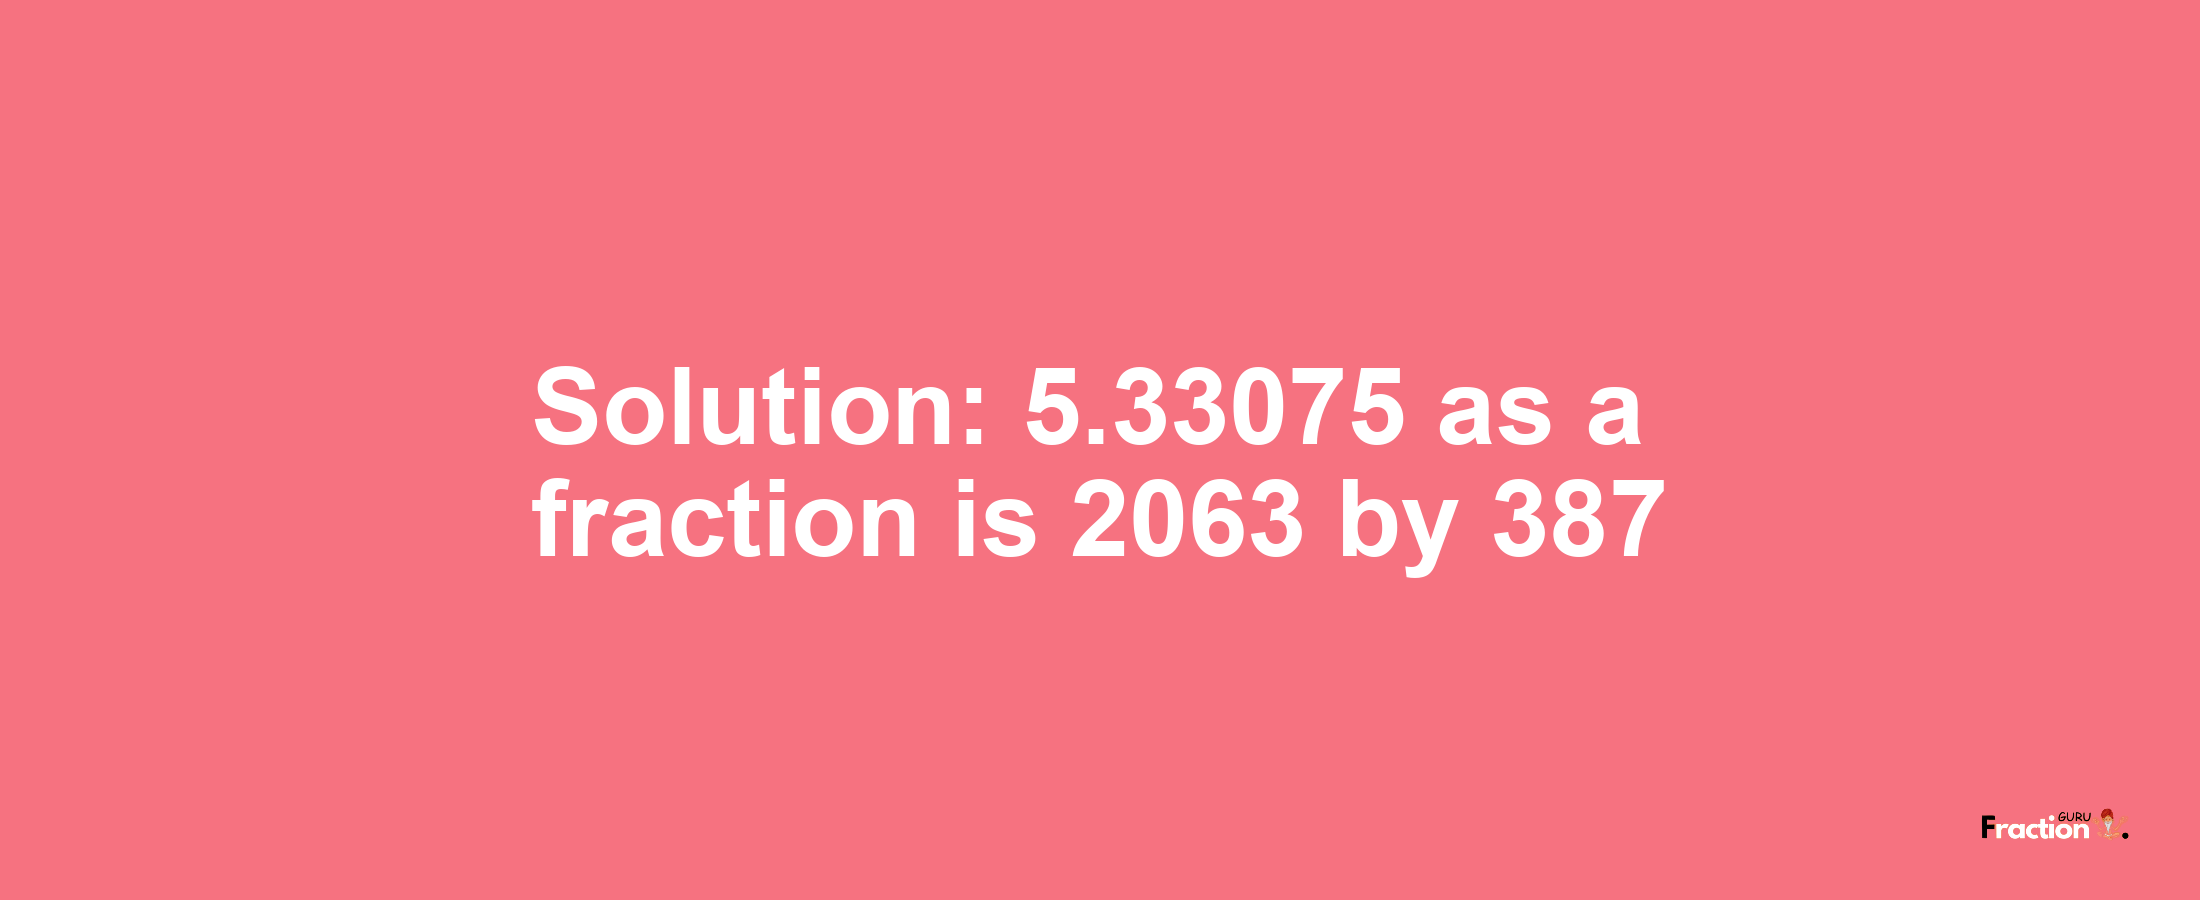 Solution:5.33075 as a fraction is 2063/387